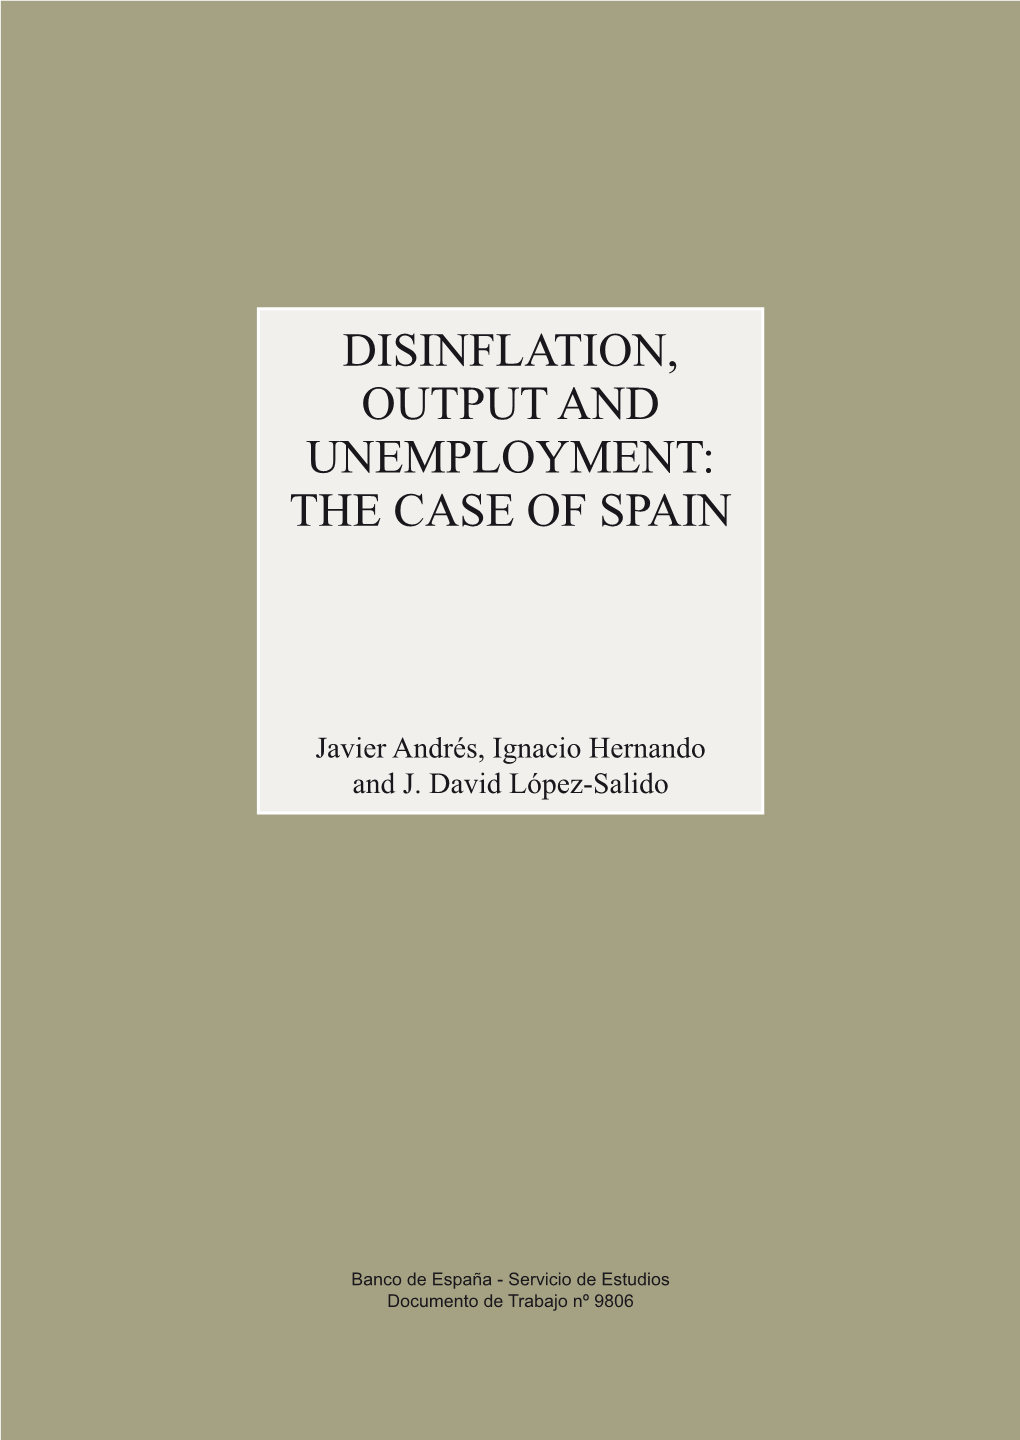 Disinflation, Output and Unemployment: the Case of Spain